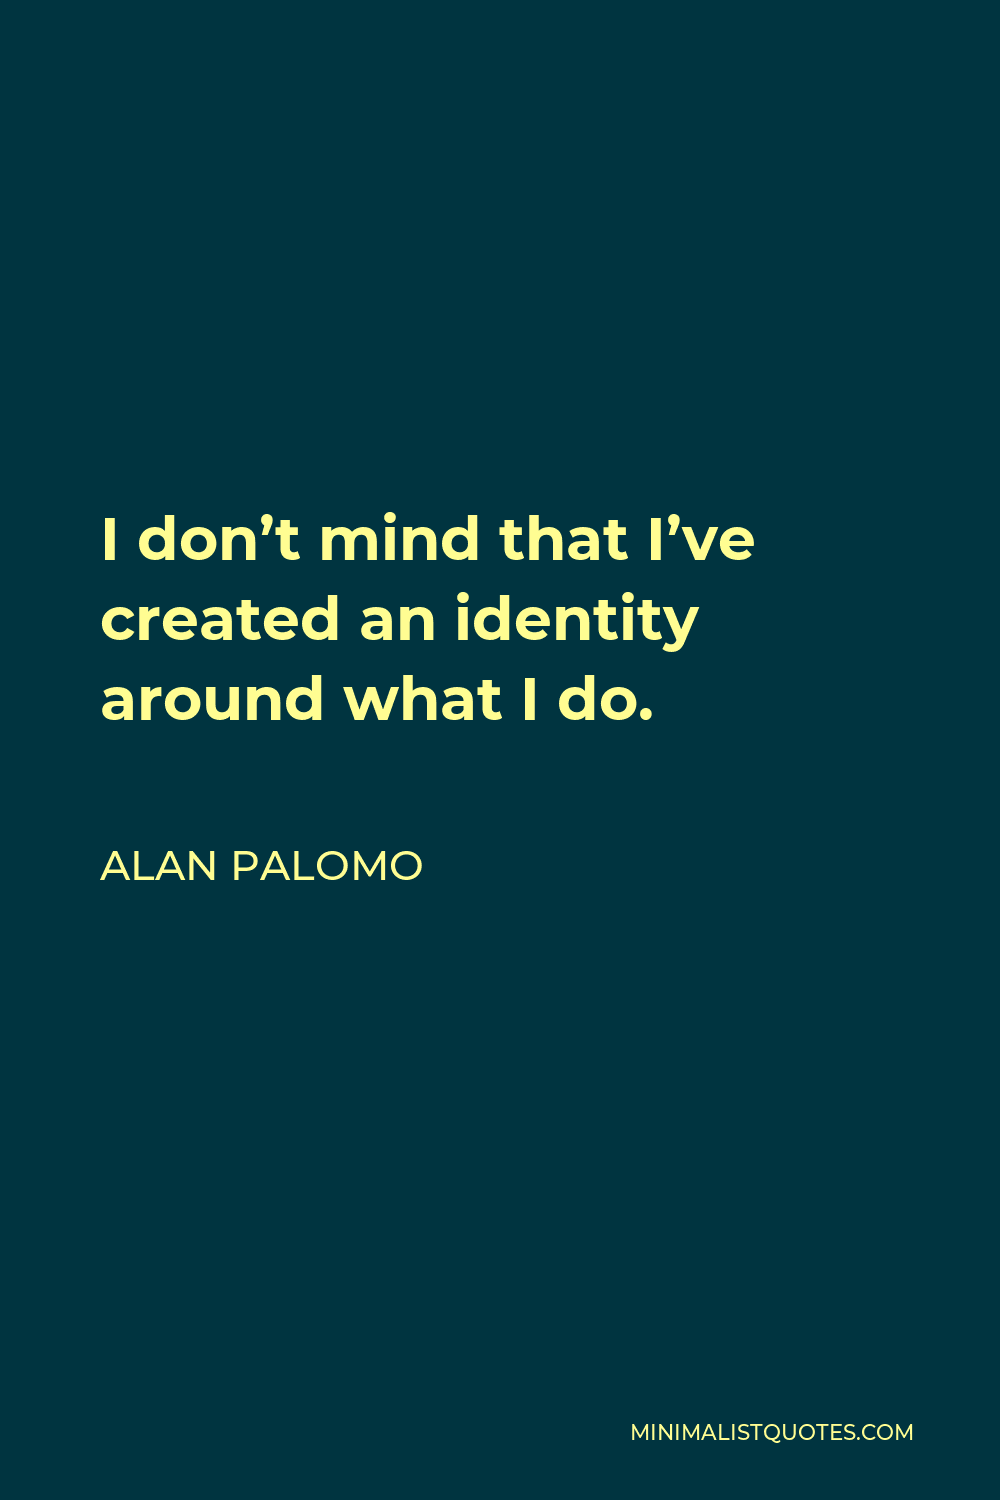 Alan Palomo Quote - I don’t mind that I’ve created an identity around what I do.